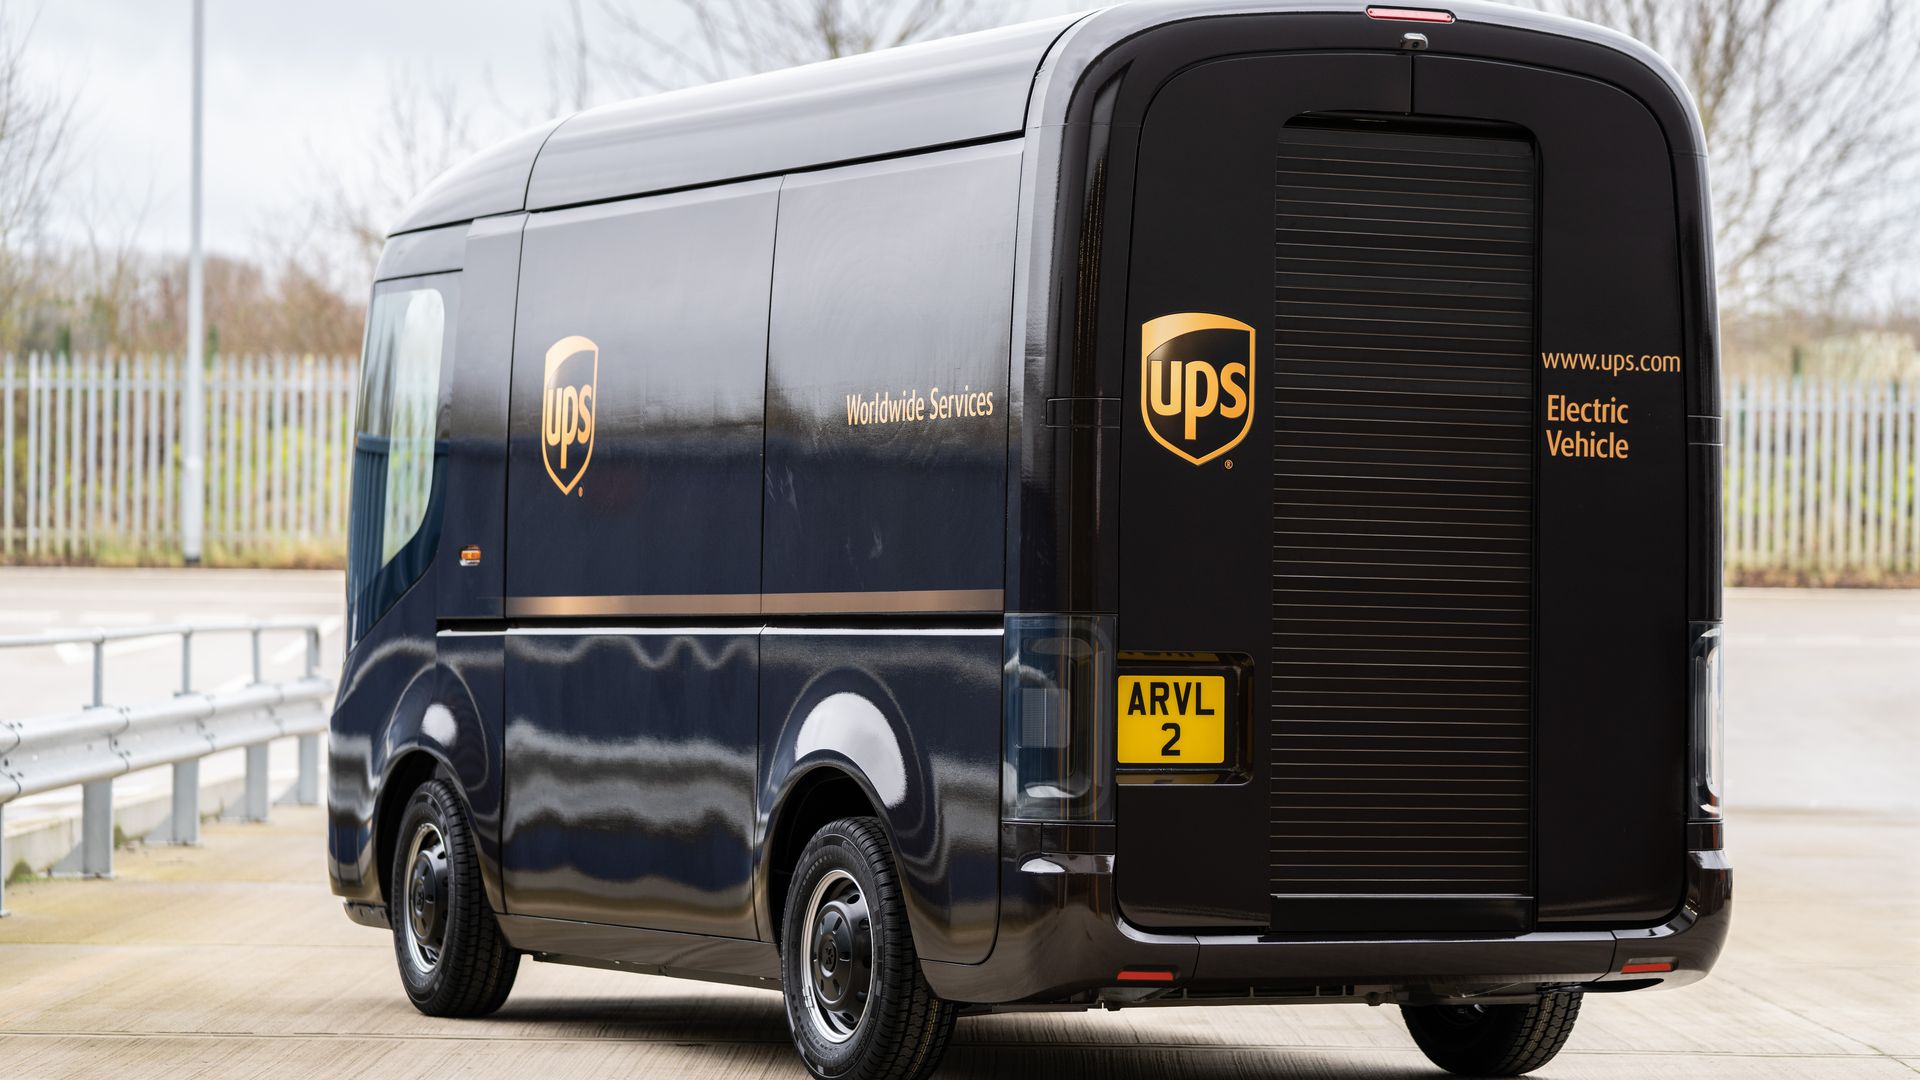 Image of prototype electric UPS delivery van from Arrival